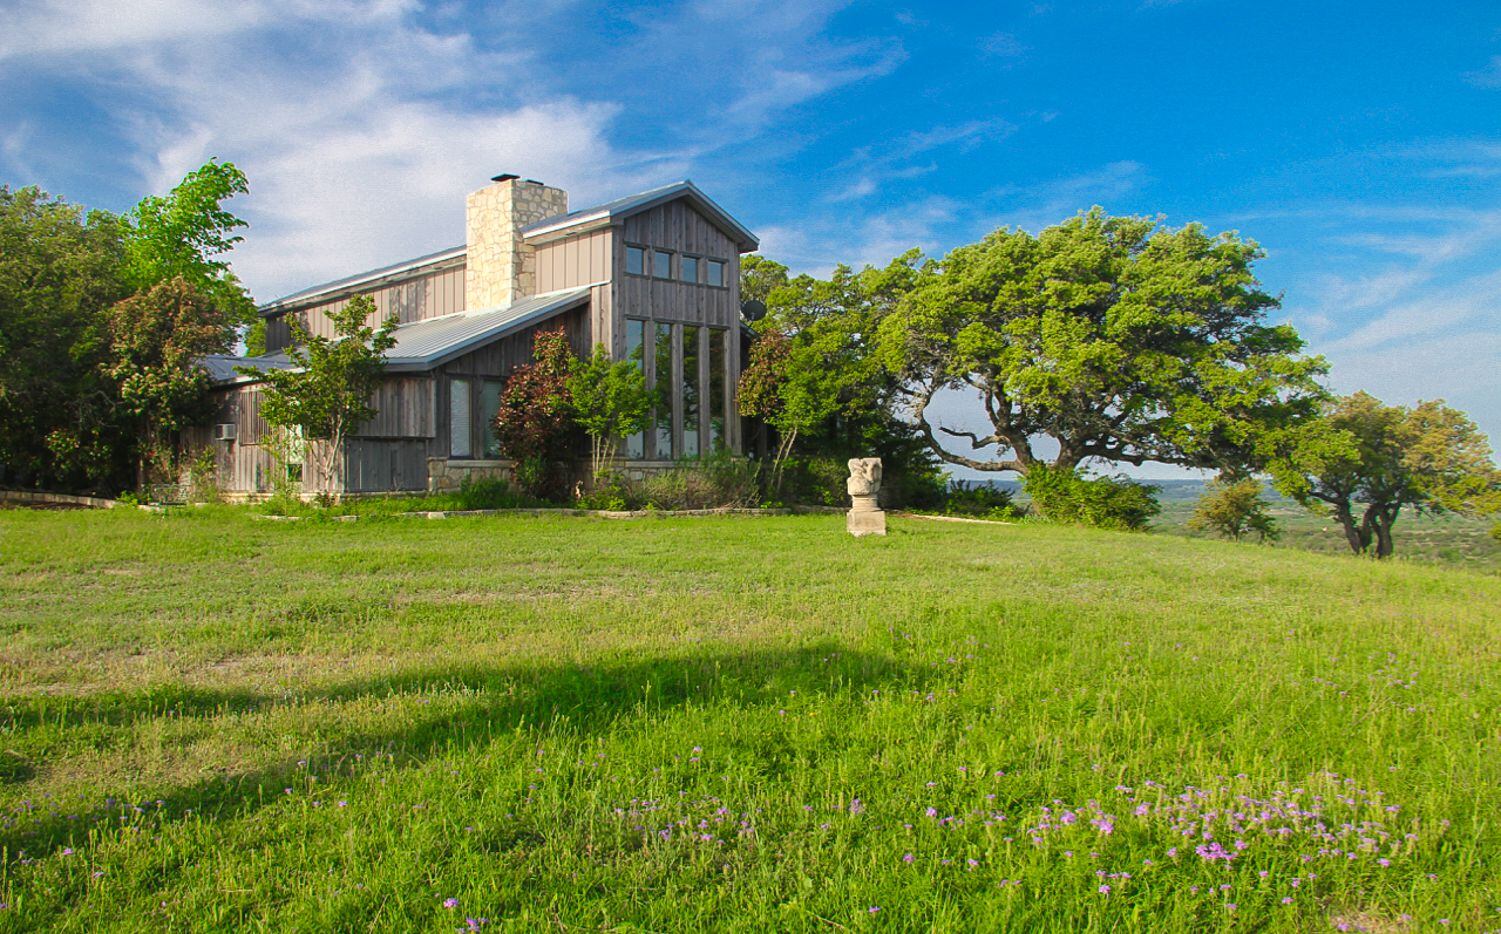 The one-time Texas Hill Country property of former President Lyndon B. Johnson has listed for $2.8 million.